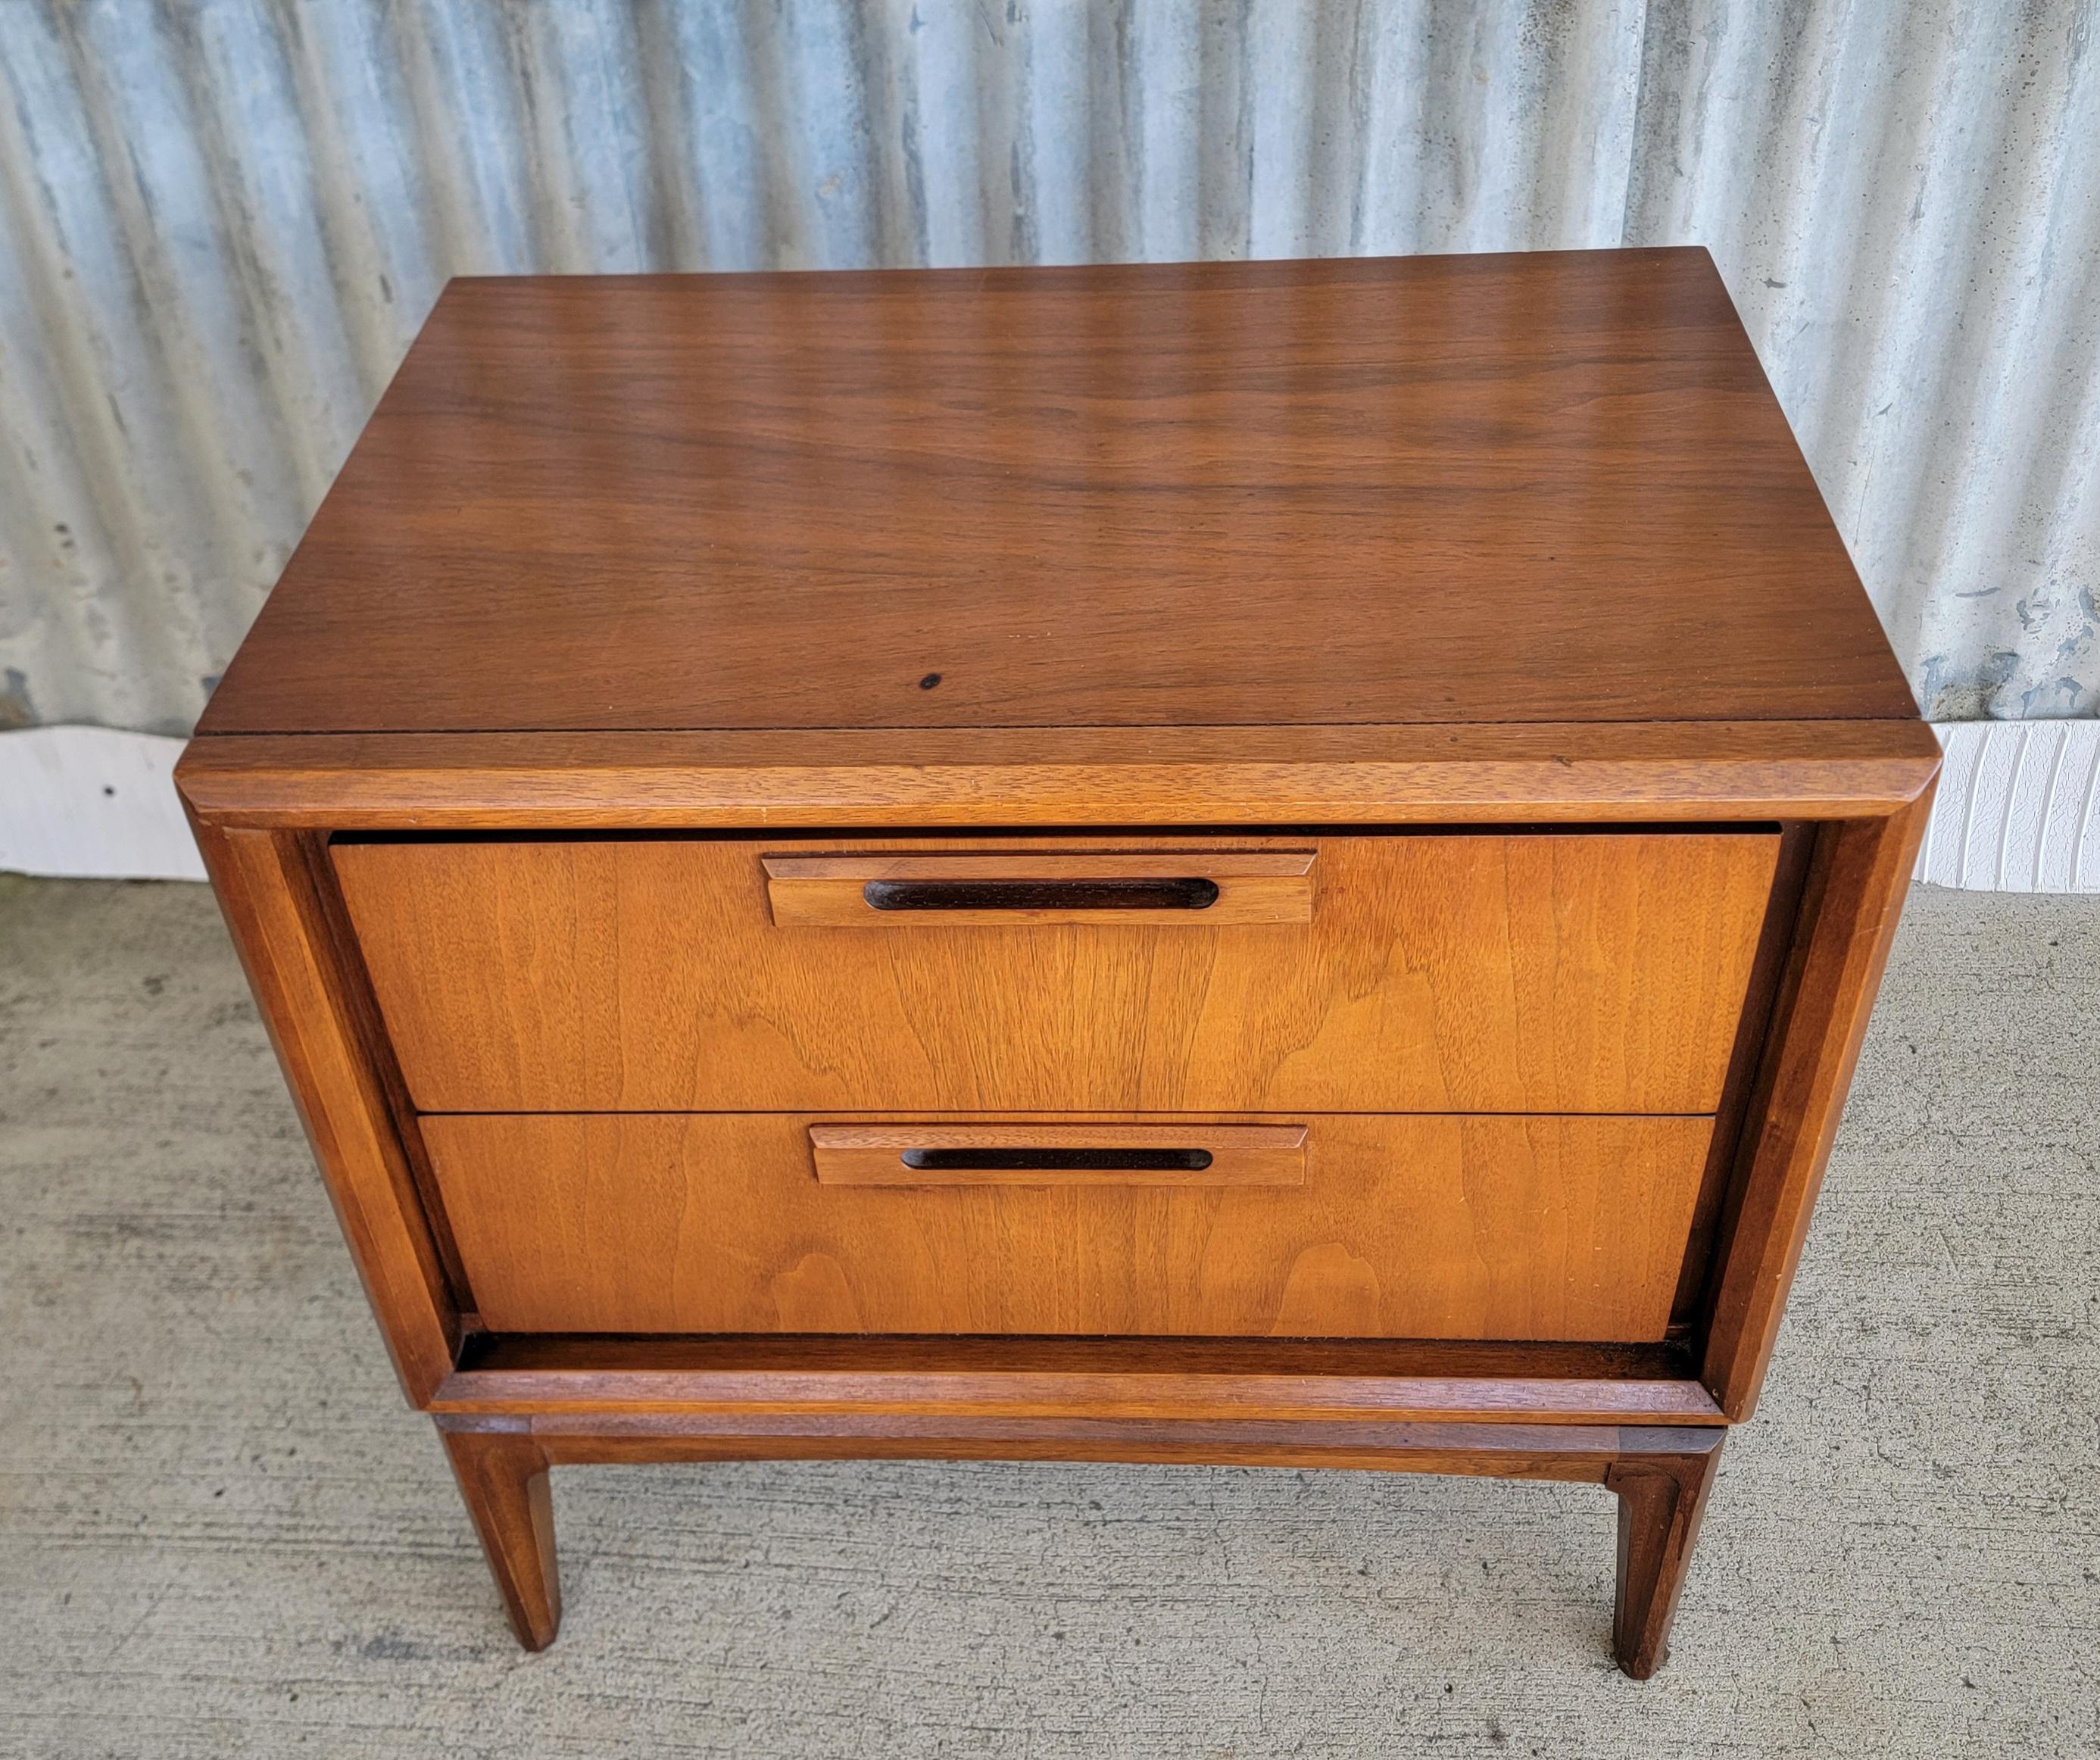 A walnut nightstand by United Furniture Company, circa. 1950. Fine craftsmanship with solid oak interior woods and dovetail construction. Dust panels between drawers and center drawer glide tracks. Very good original condition retaining its original